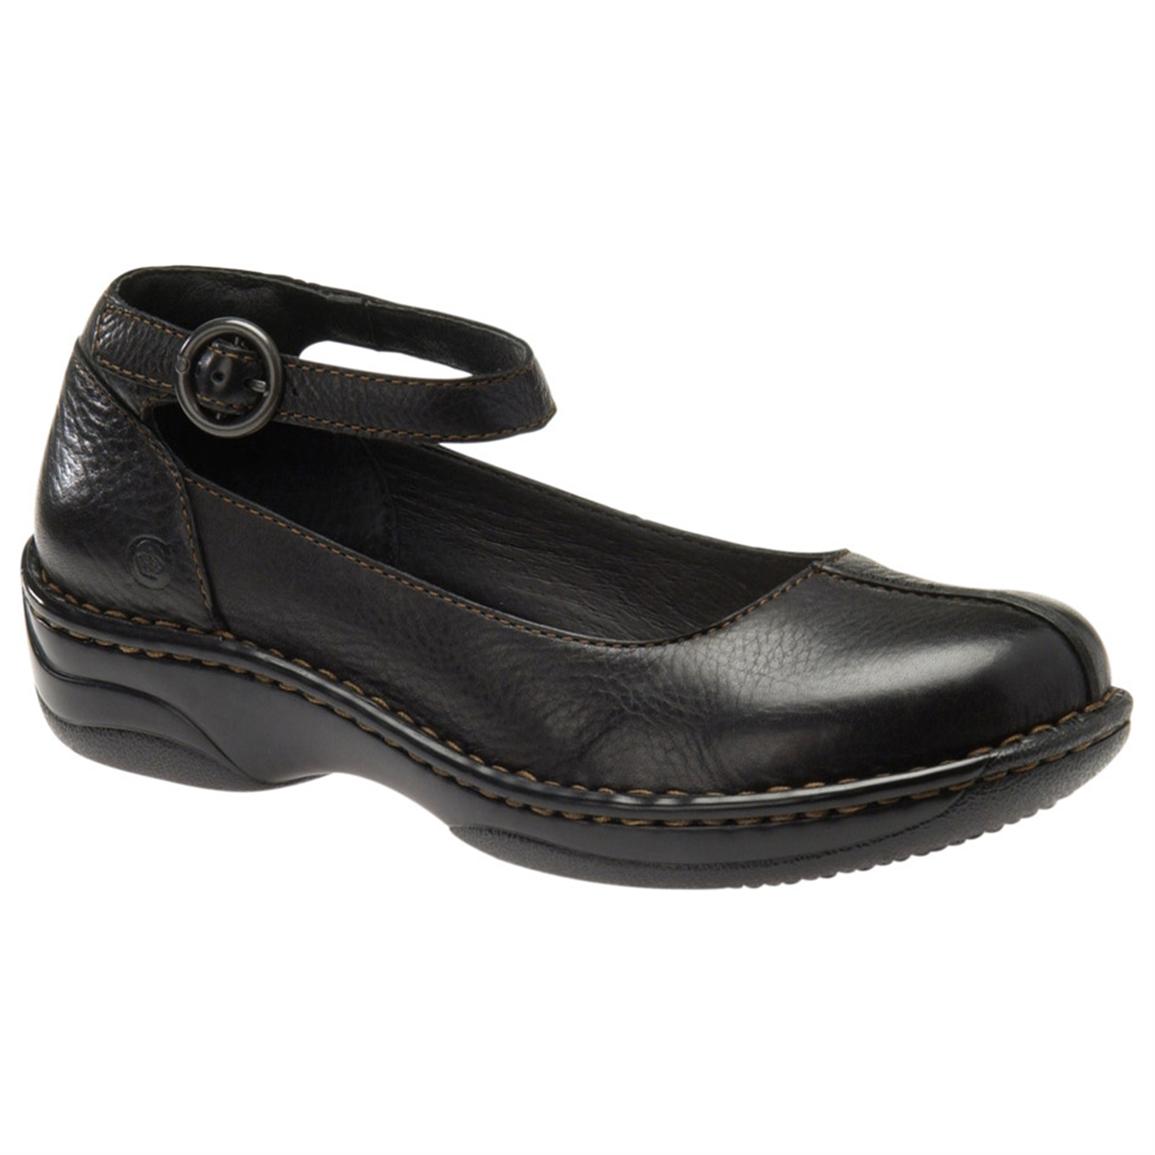 Women's Børn Fifth Avenue Shoes - 148027, Casual Shoes at Sportsman's Guide